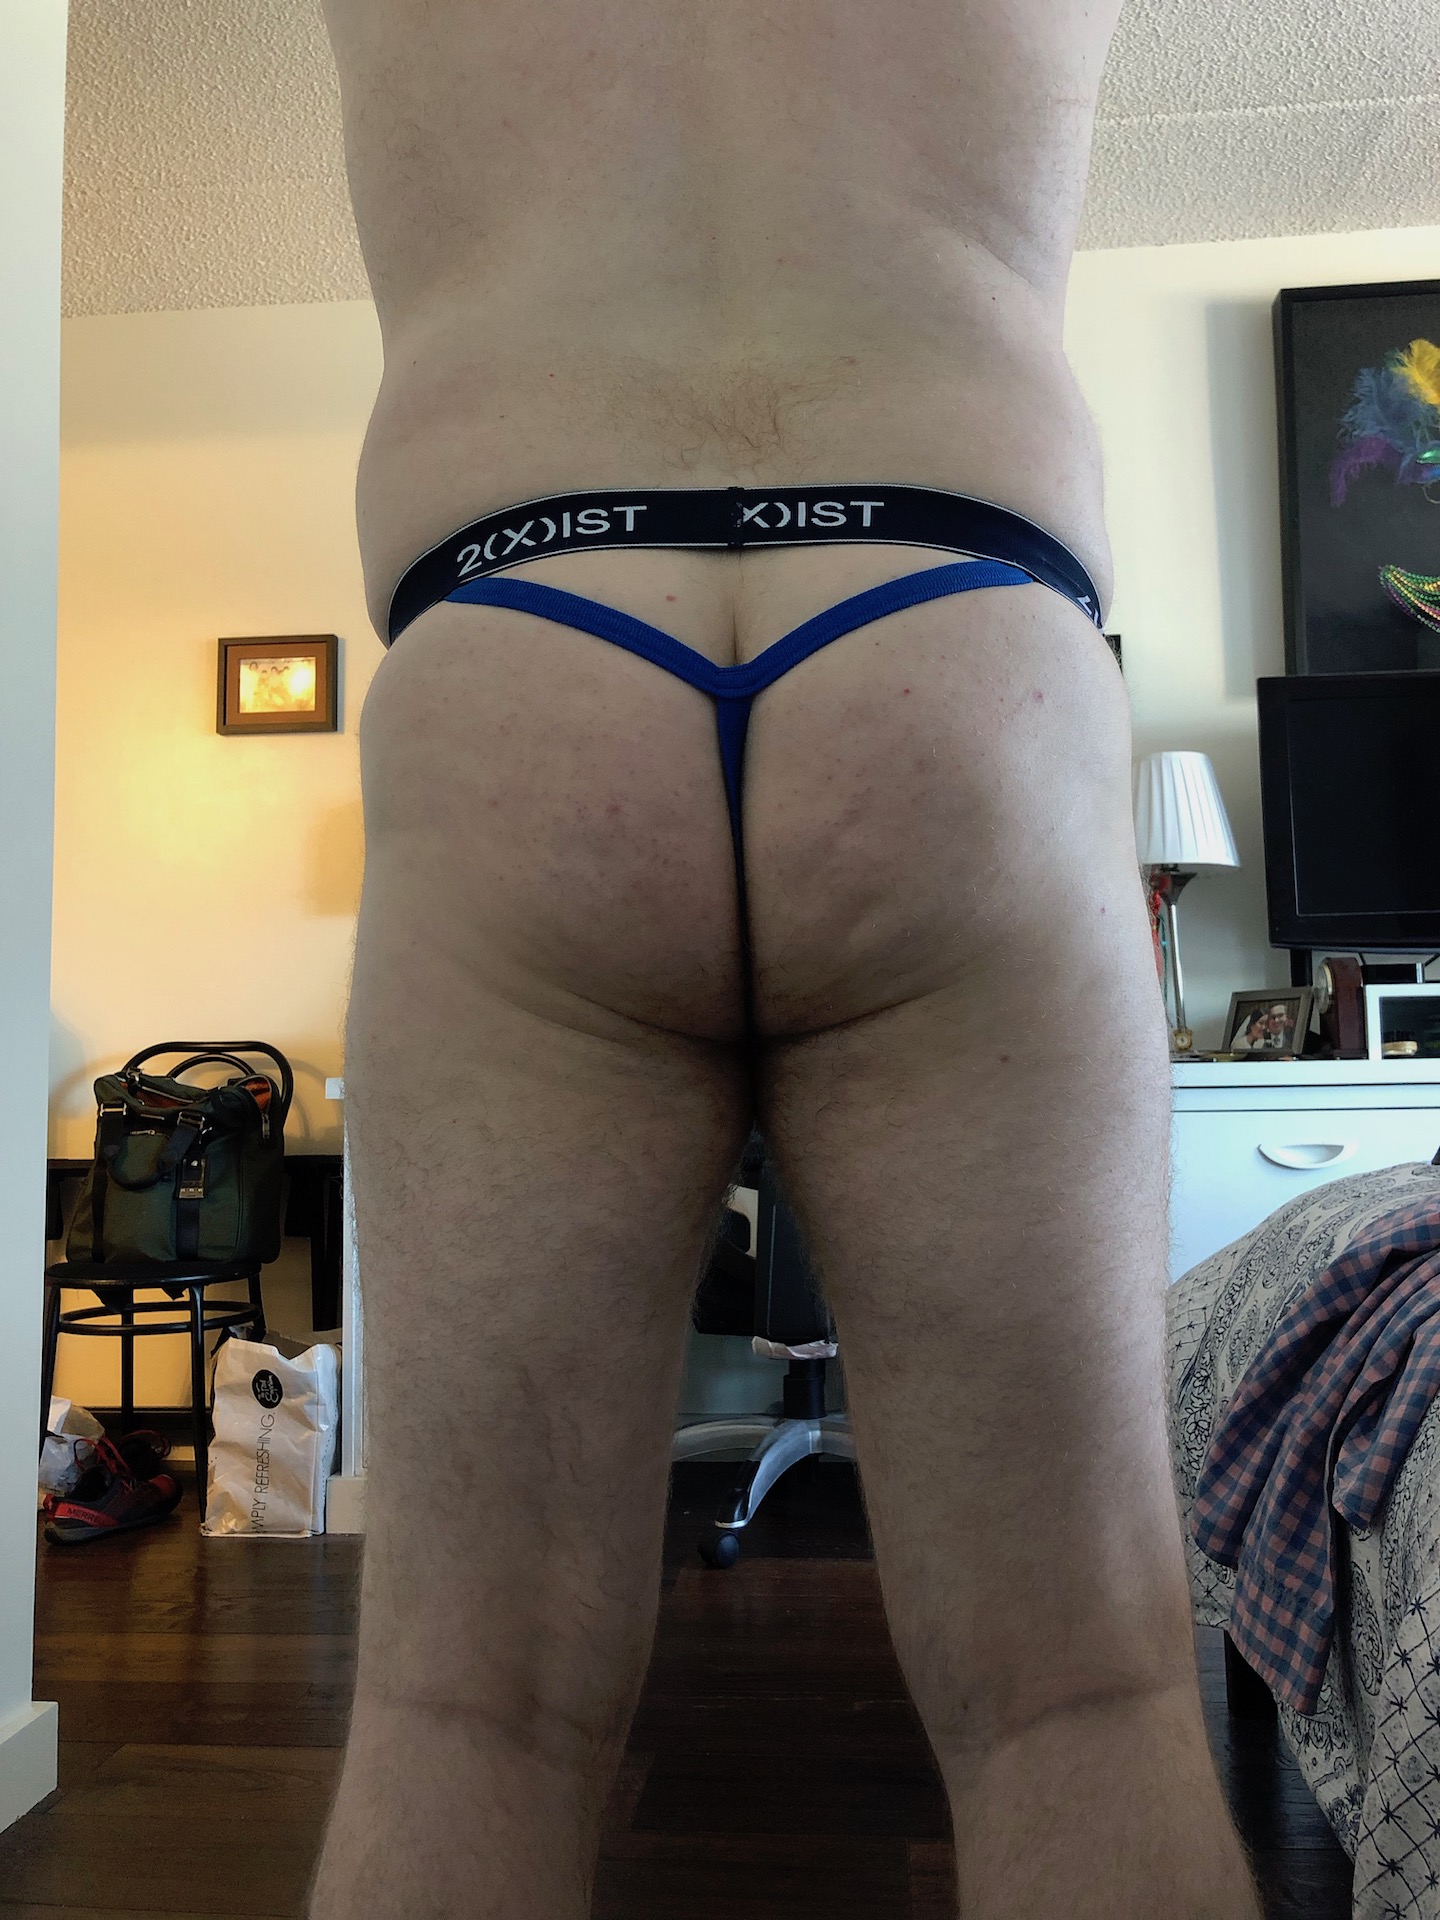 More essentials today…this time a thong…